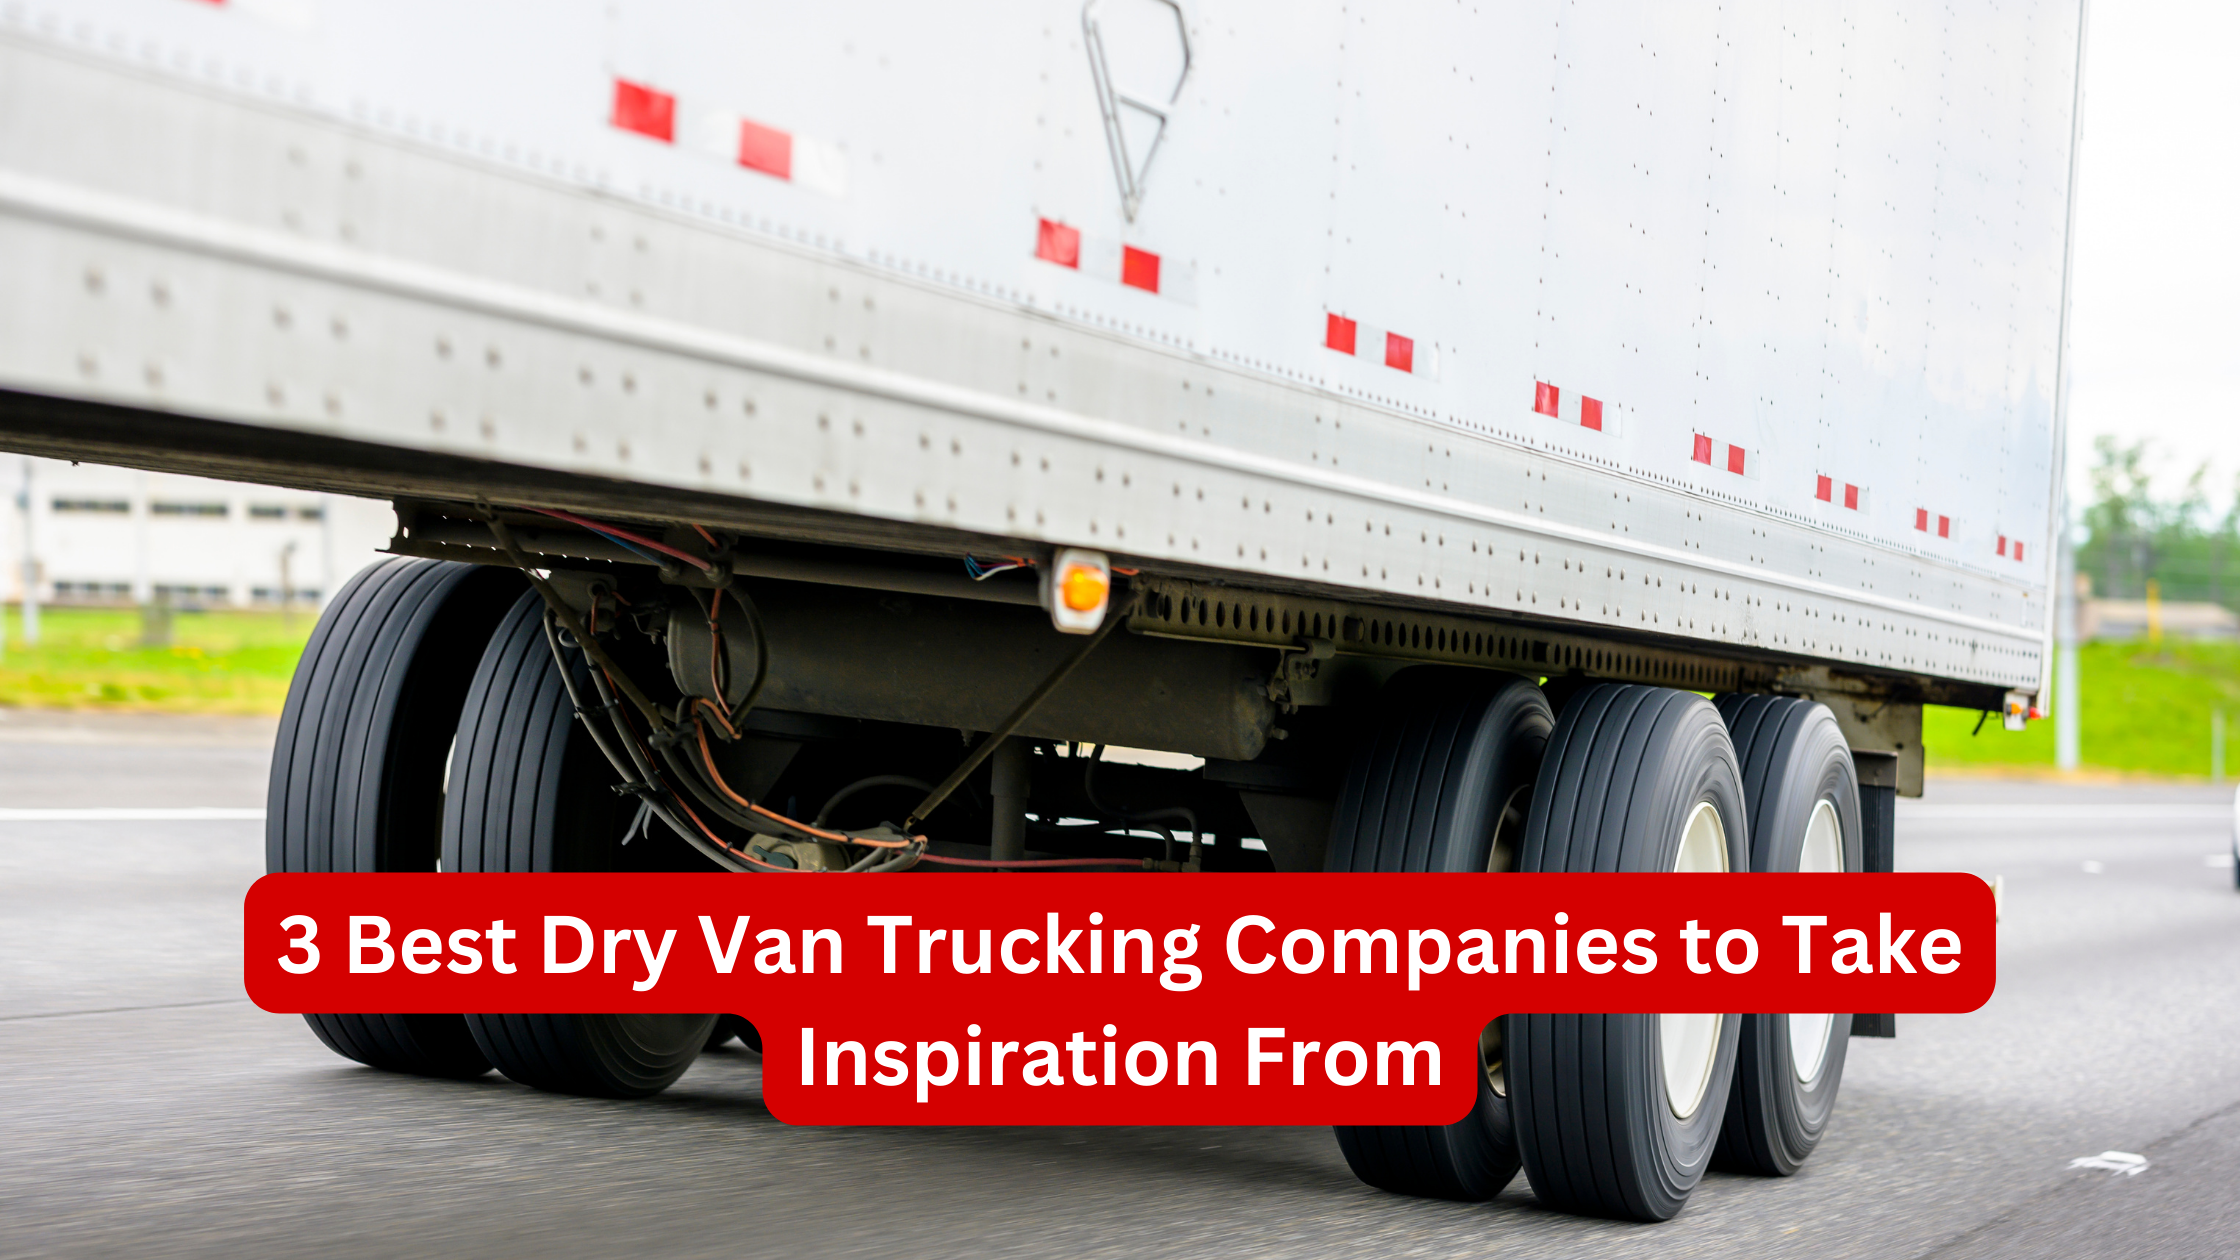 3 Best Dry Van Trucking Companies to Take Inspiration From